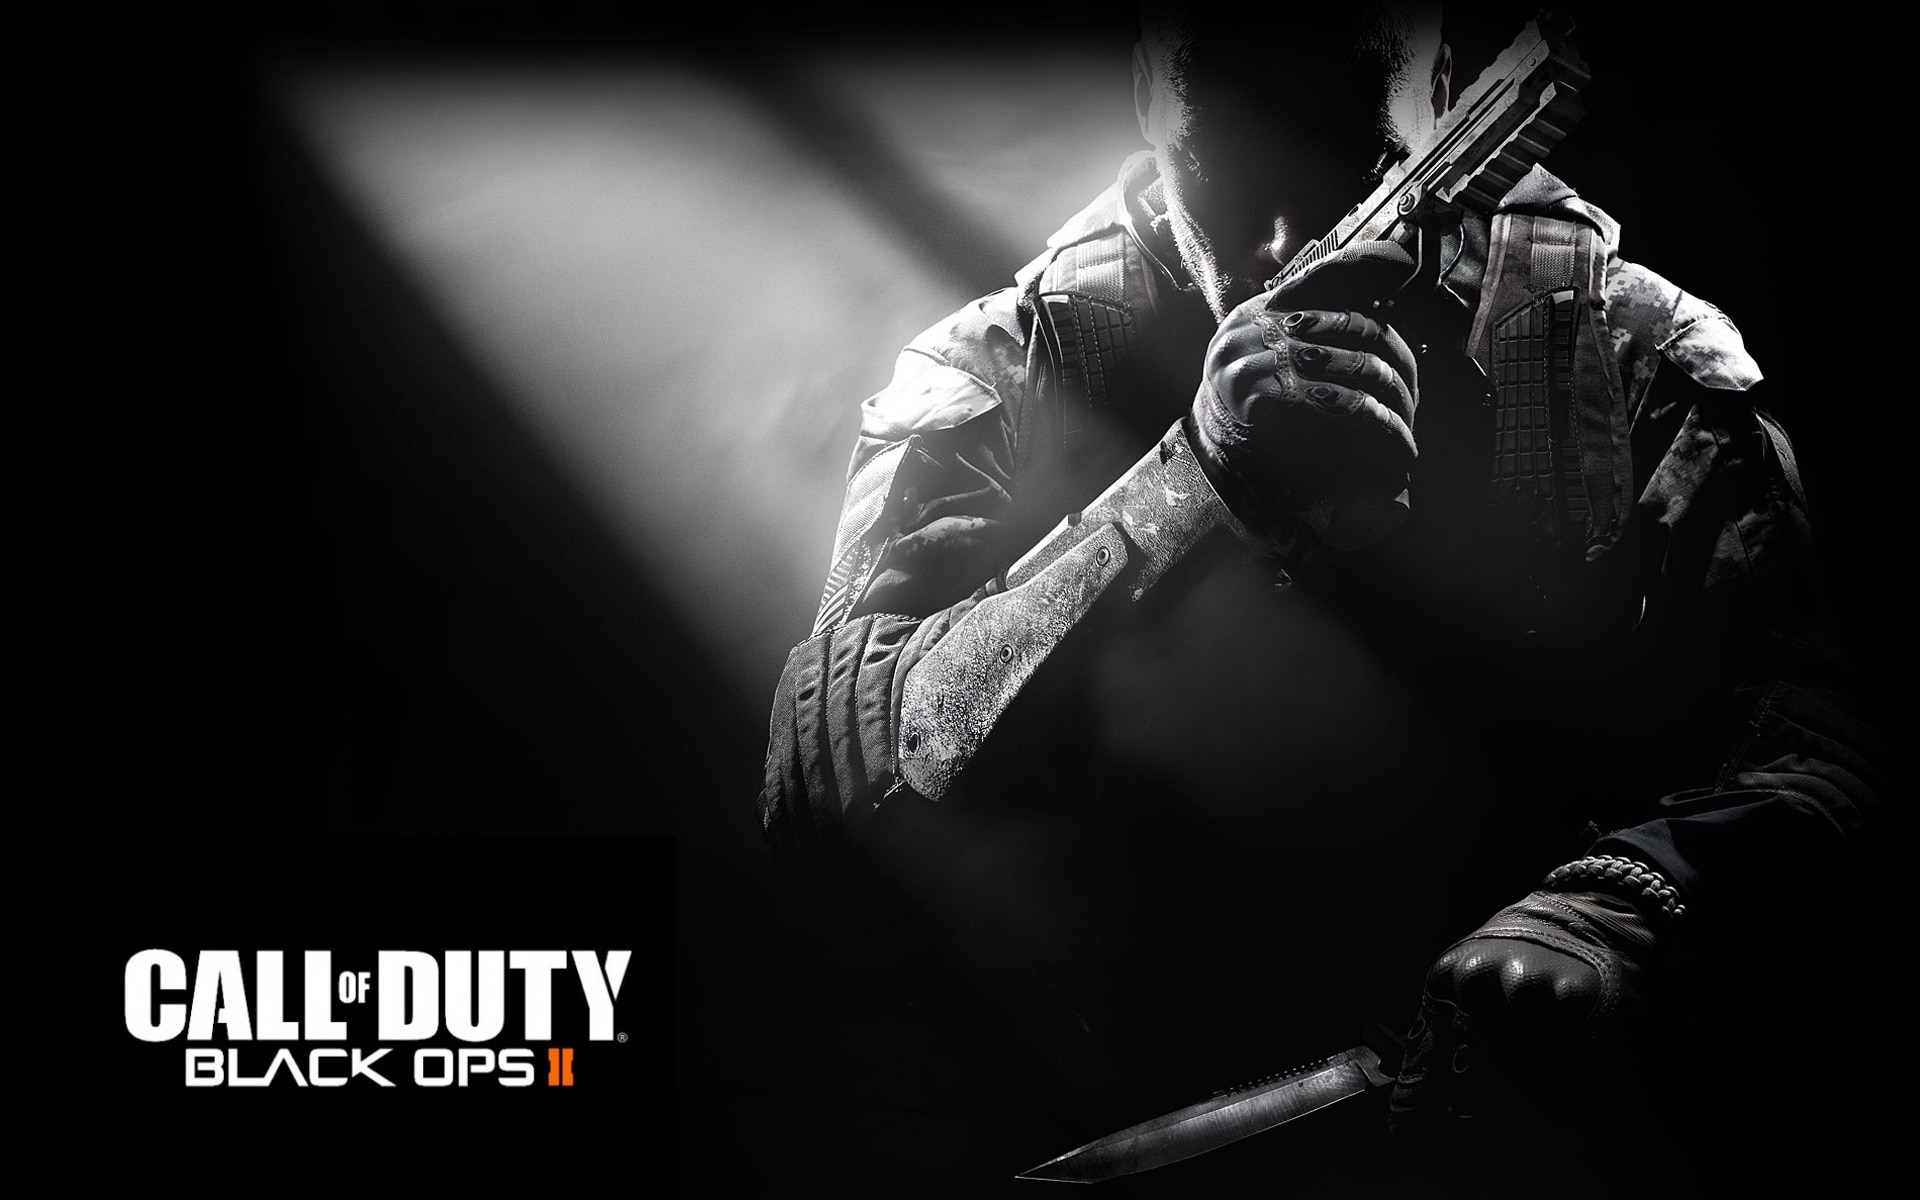 Steam Community :: Call of Duty: Black Ops II - Multiplayer